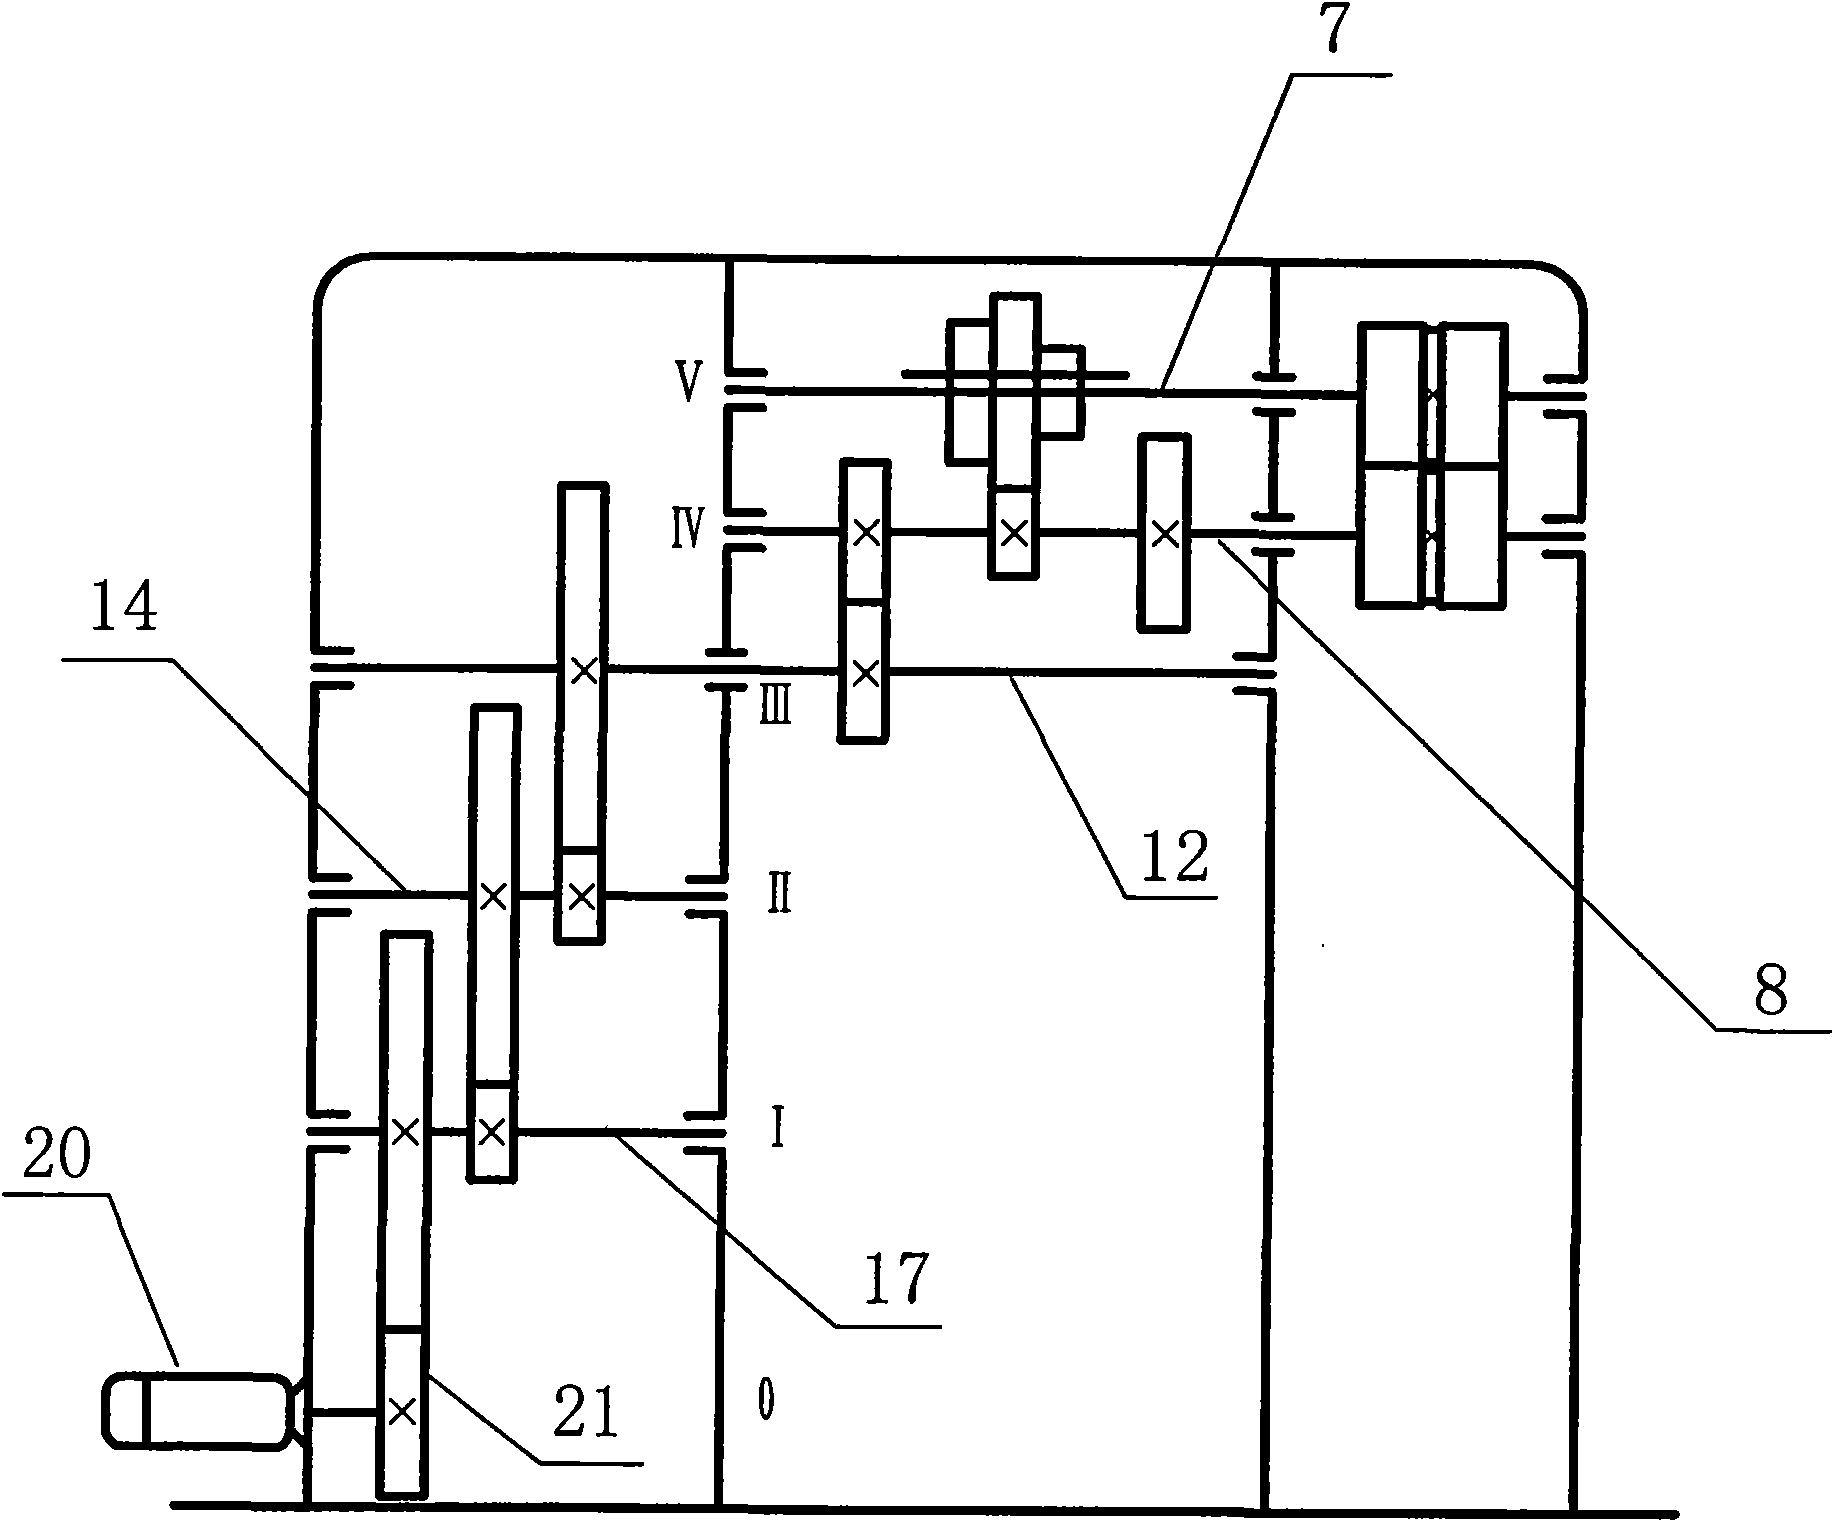 Continuous drive type equal channel angular pressing texturing processing equipment